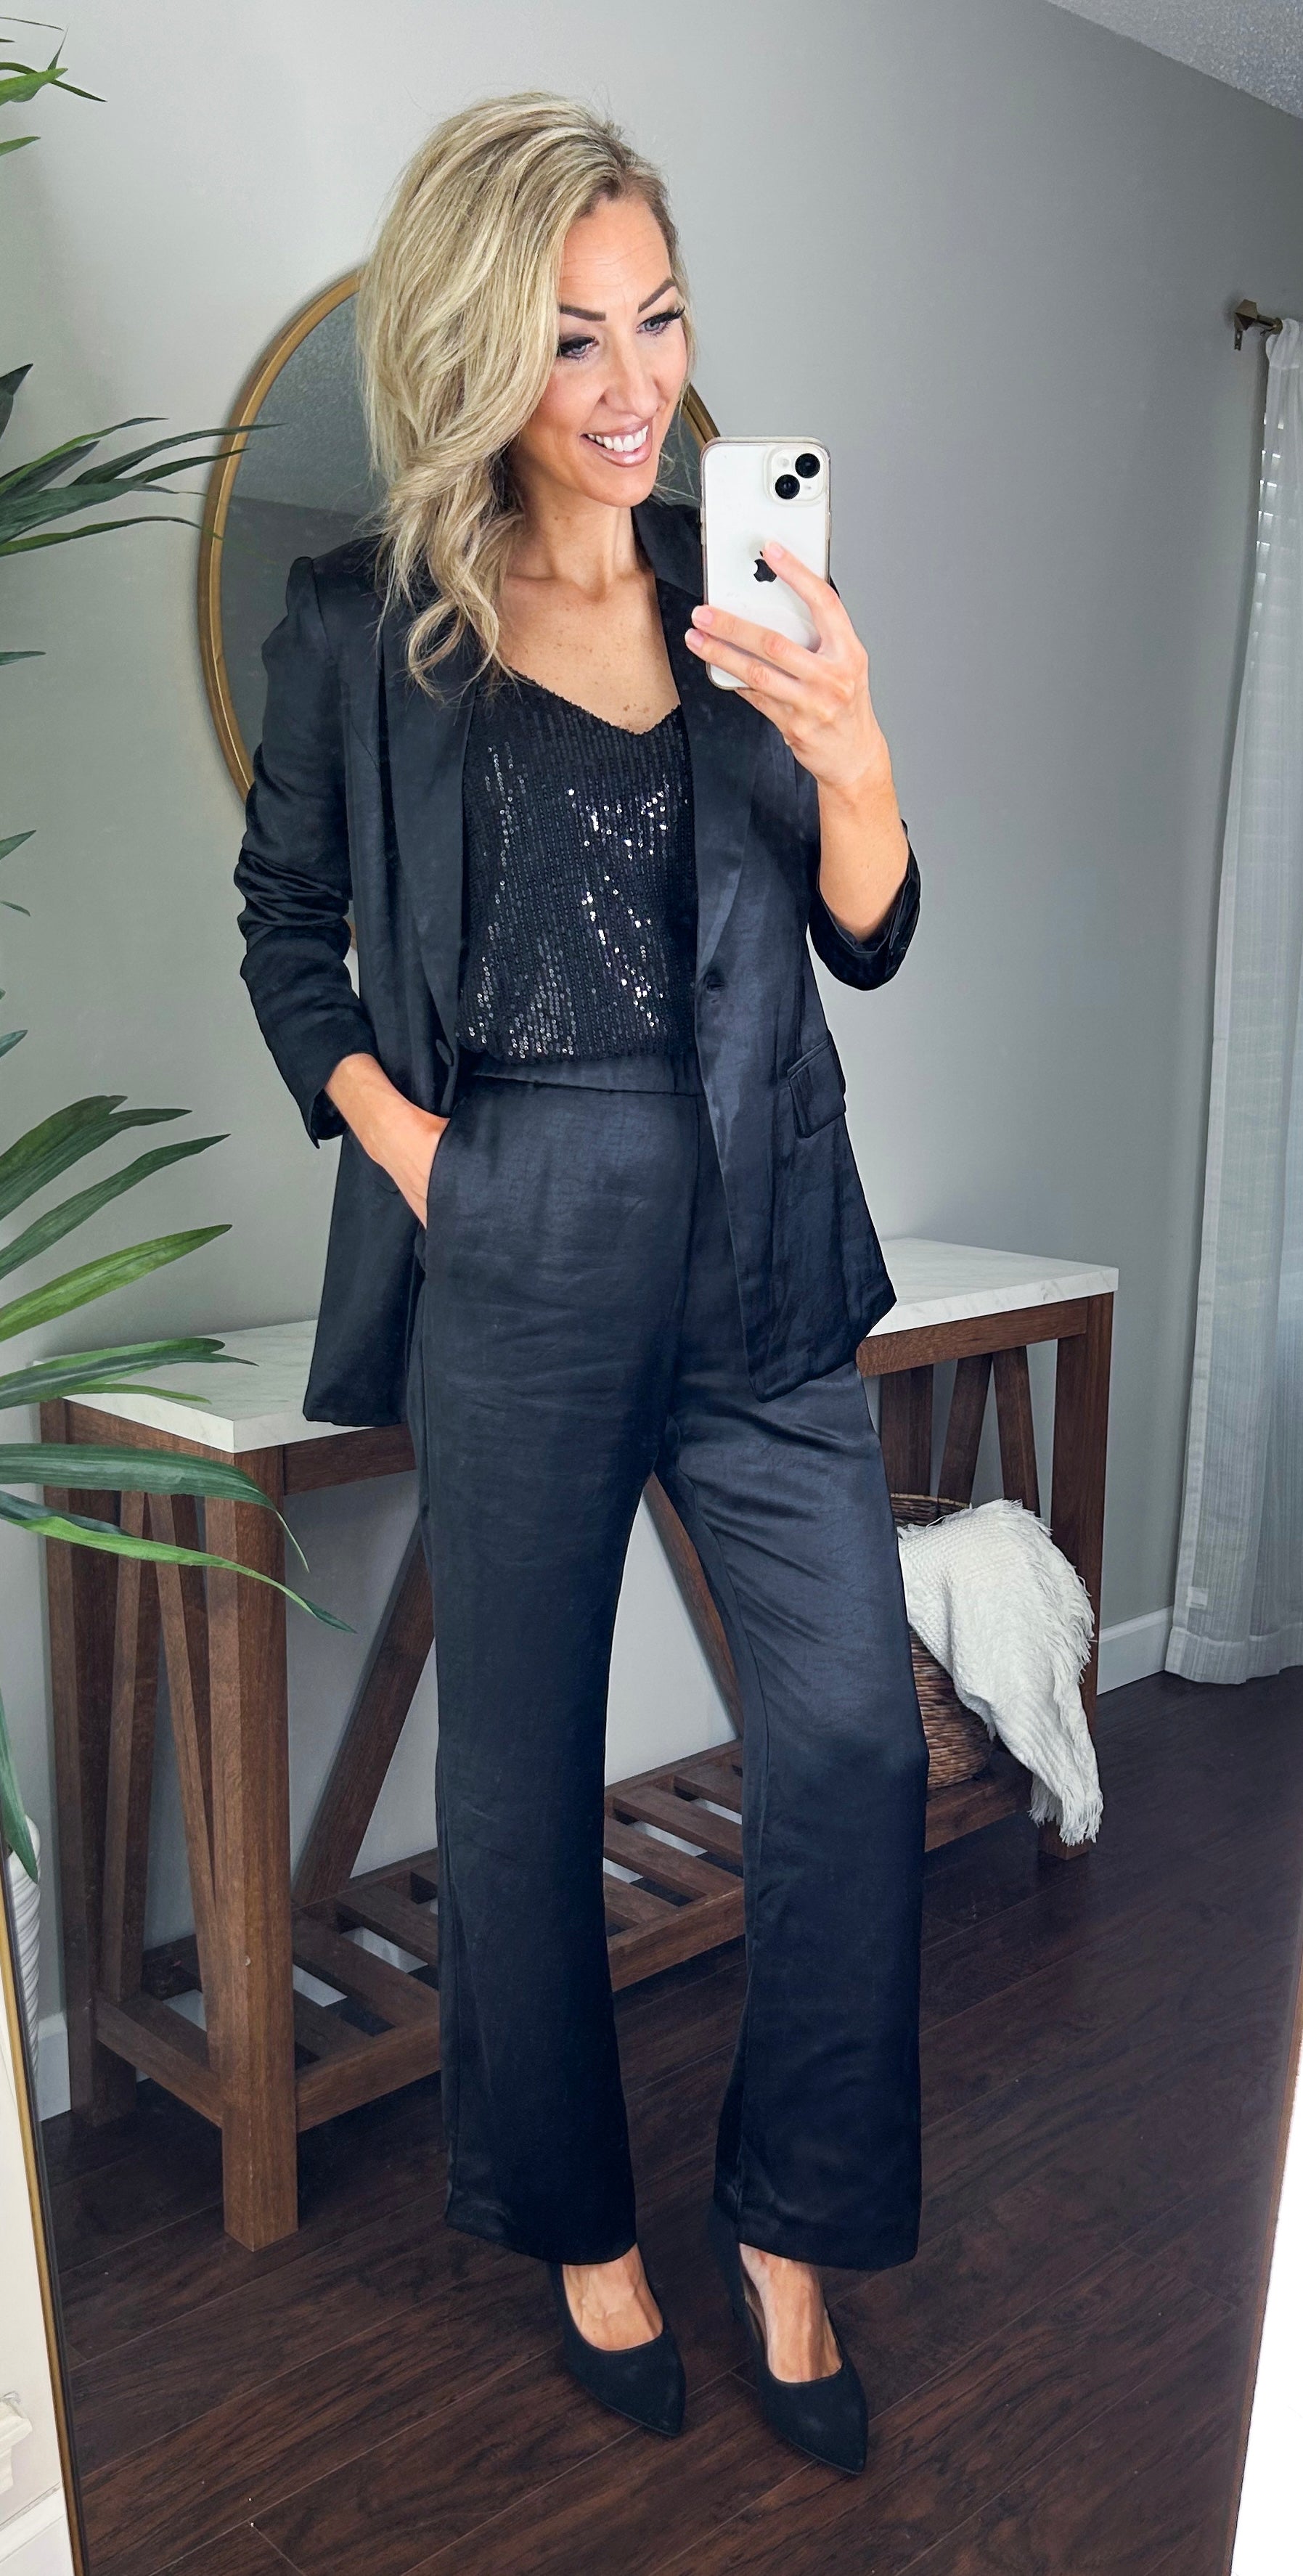 5 Of The Best Dress Pants For Women + Outfit Ideas | Bergdorf Goodman